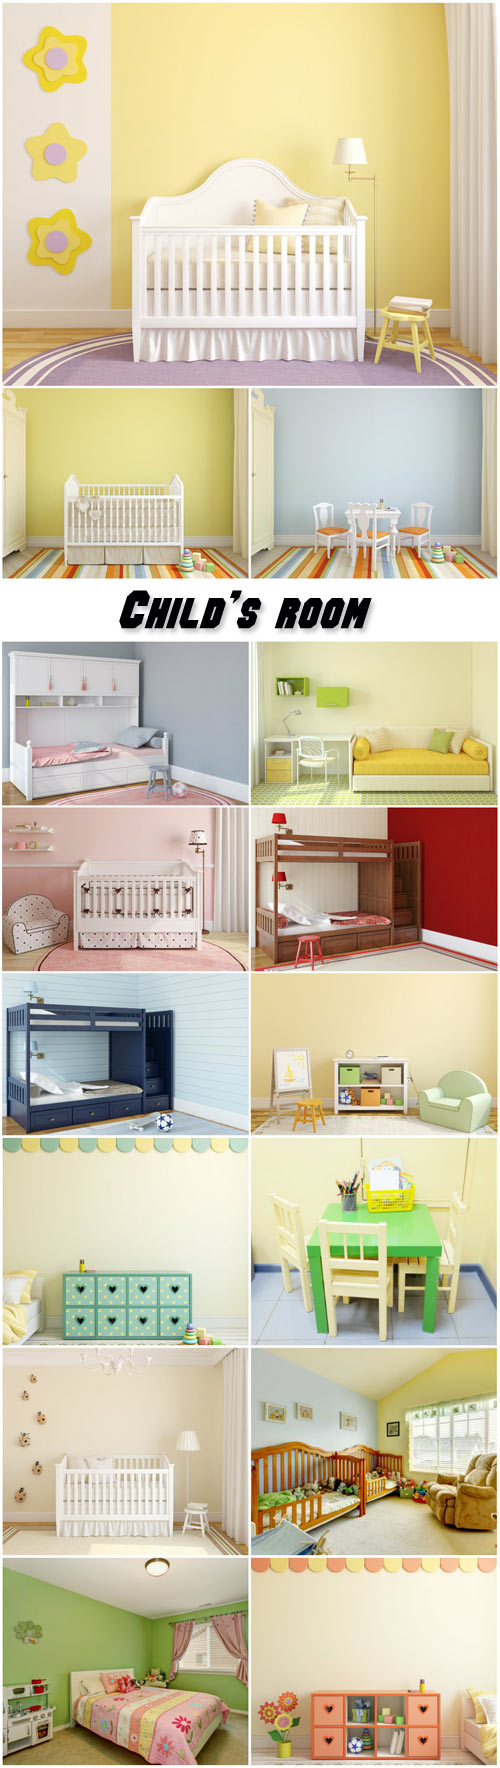 Child's room, bed and a table